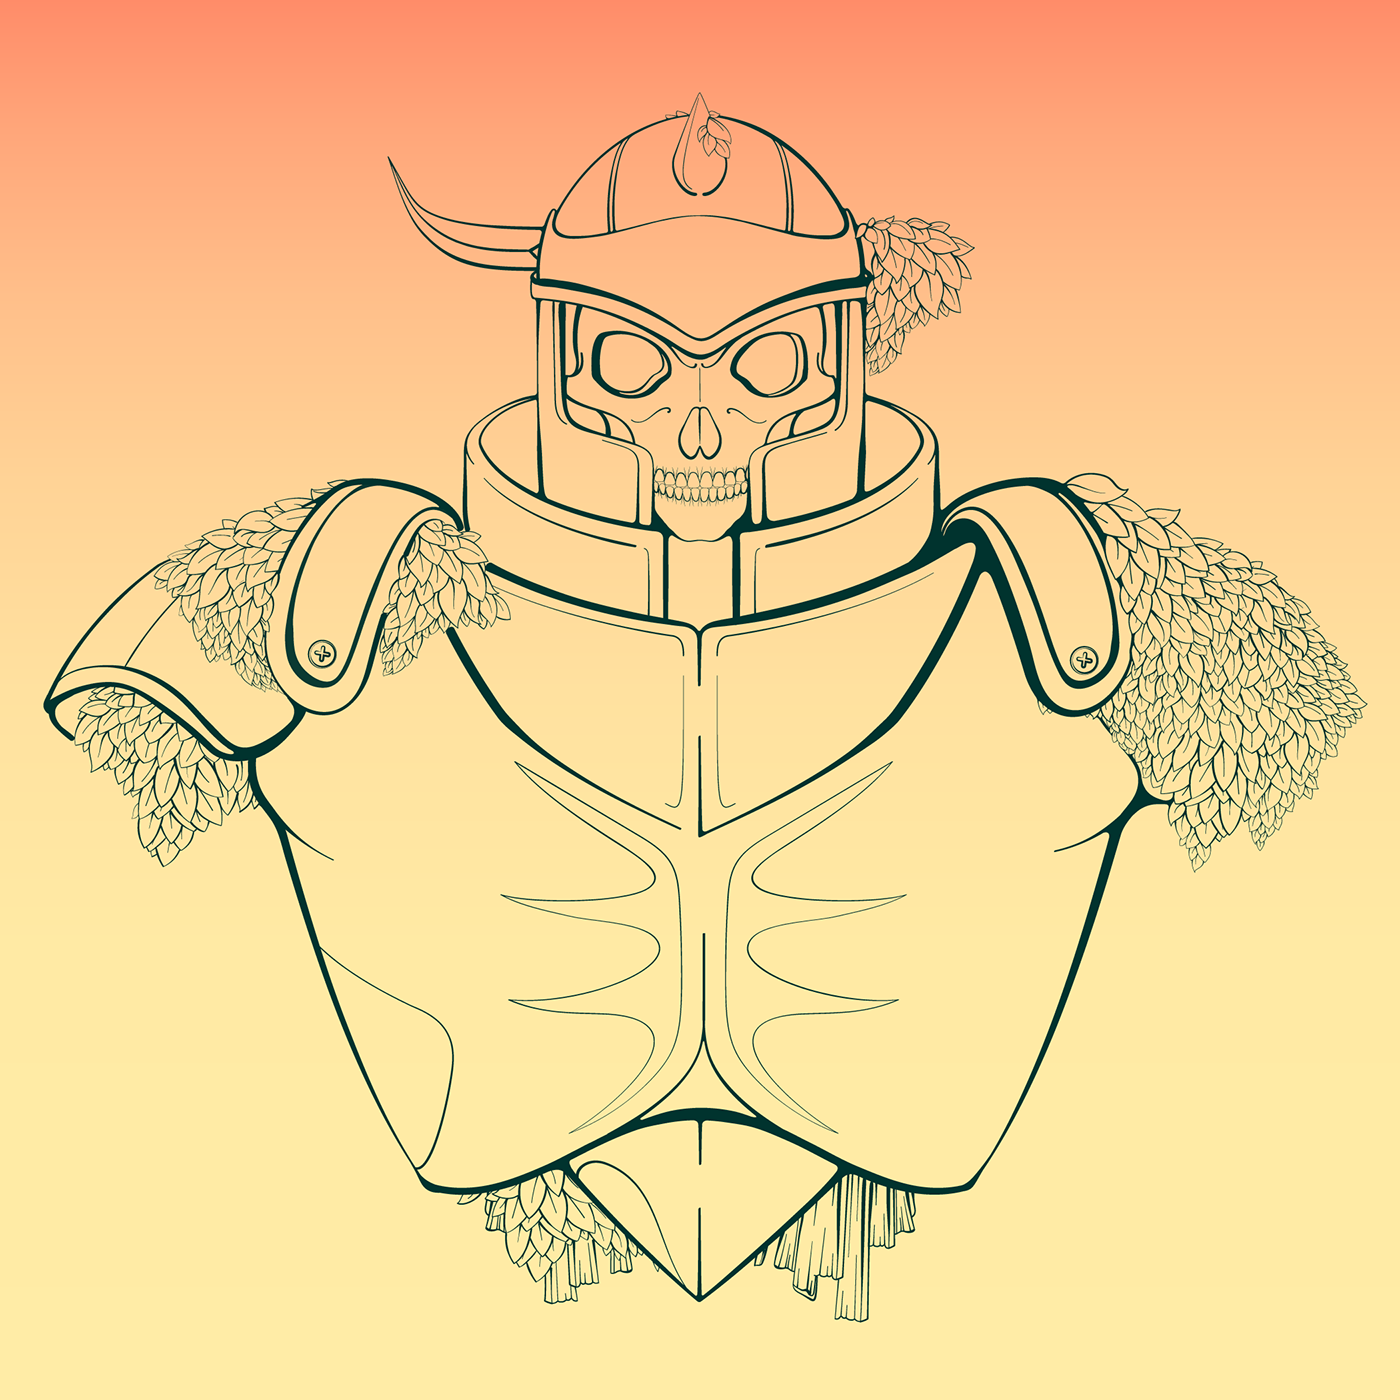 Line work of suit of armor with leaves growing out, based on ancient hero from zelda.